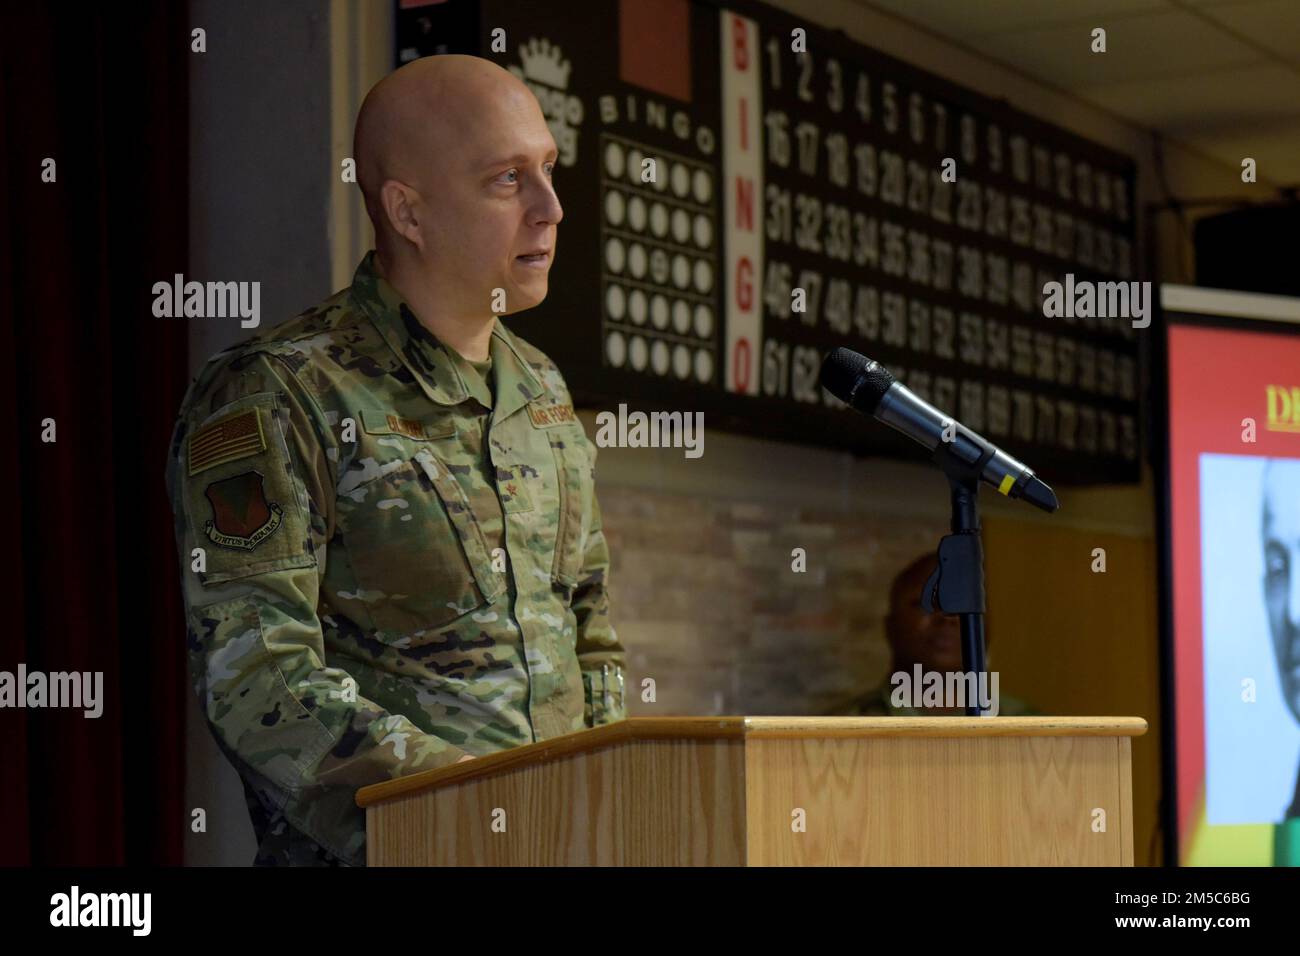 U.S. Air Force Brig. Gen. Josh Olson, 86th Airlift Wing commander, speaks at the Black History Month luncheon hosted at Ramstein Air Base, Germany, Feb. 28, 2022. This year’s BHM theme focused on Black Health and Wellness. Stock Photo